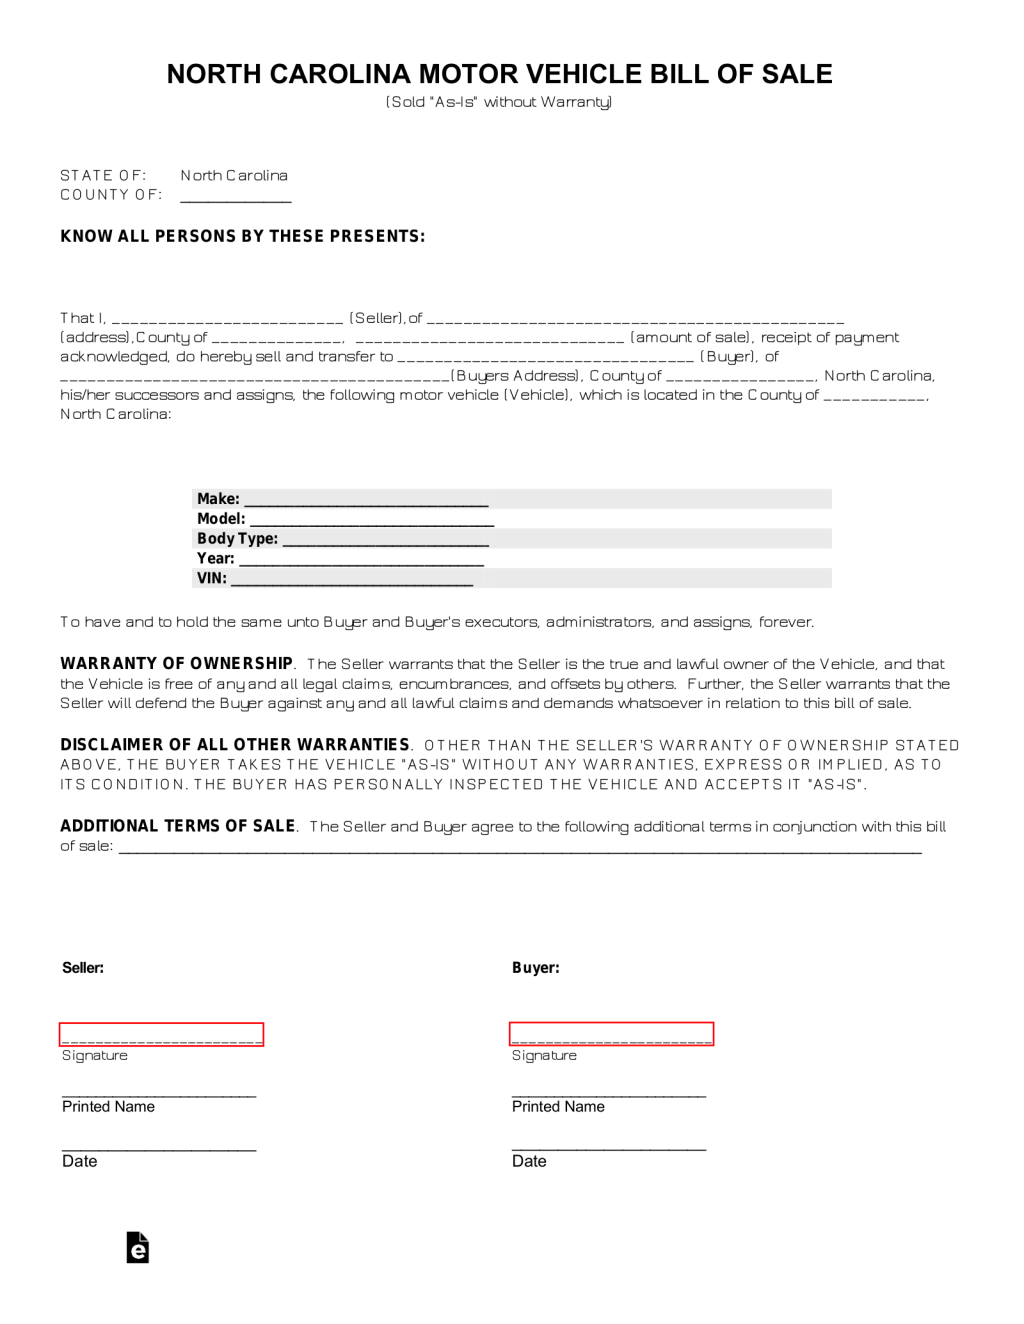 Picture of: Free North Carolina Motor Vehicle Bill of Sale Form – PDF – eForms